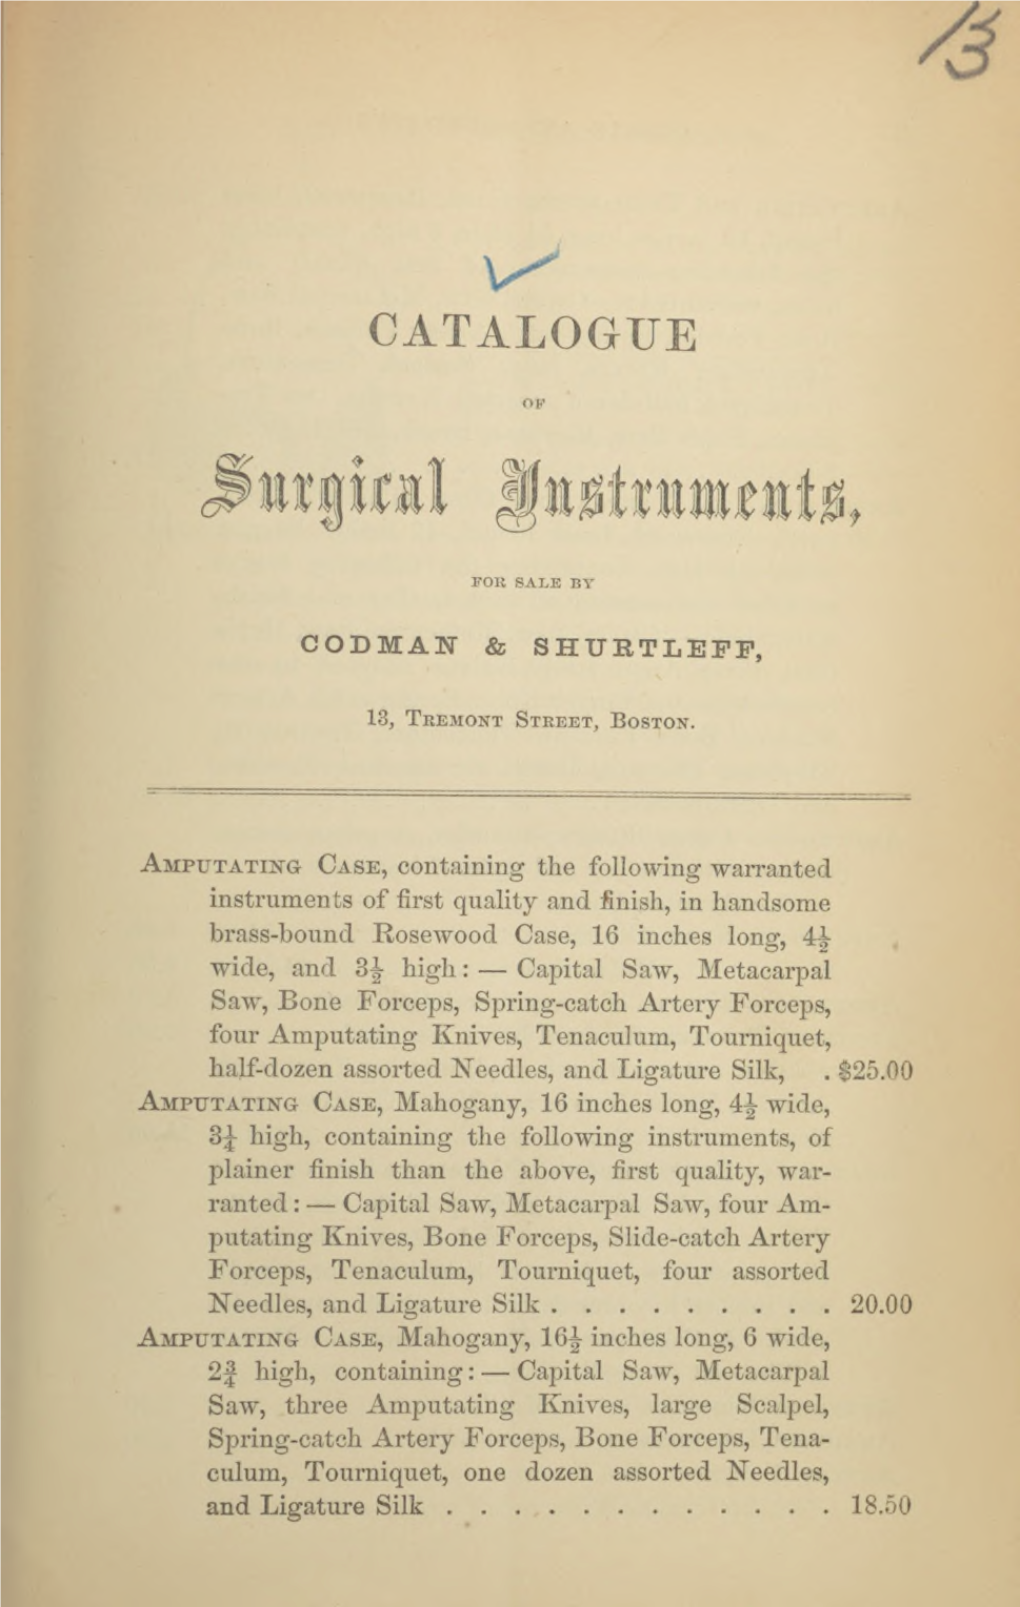 Catalogue of Surgical Instruments, for Sale by Codman & Shurtleff, 13